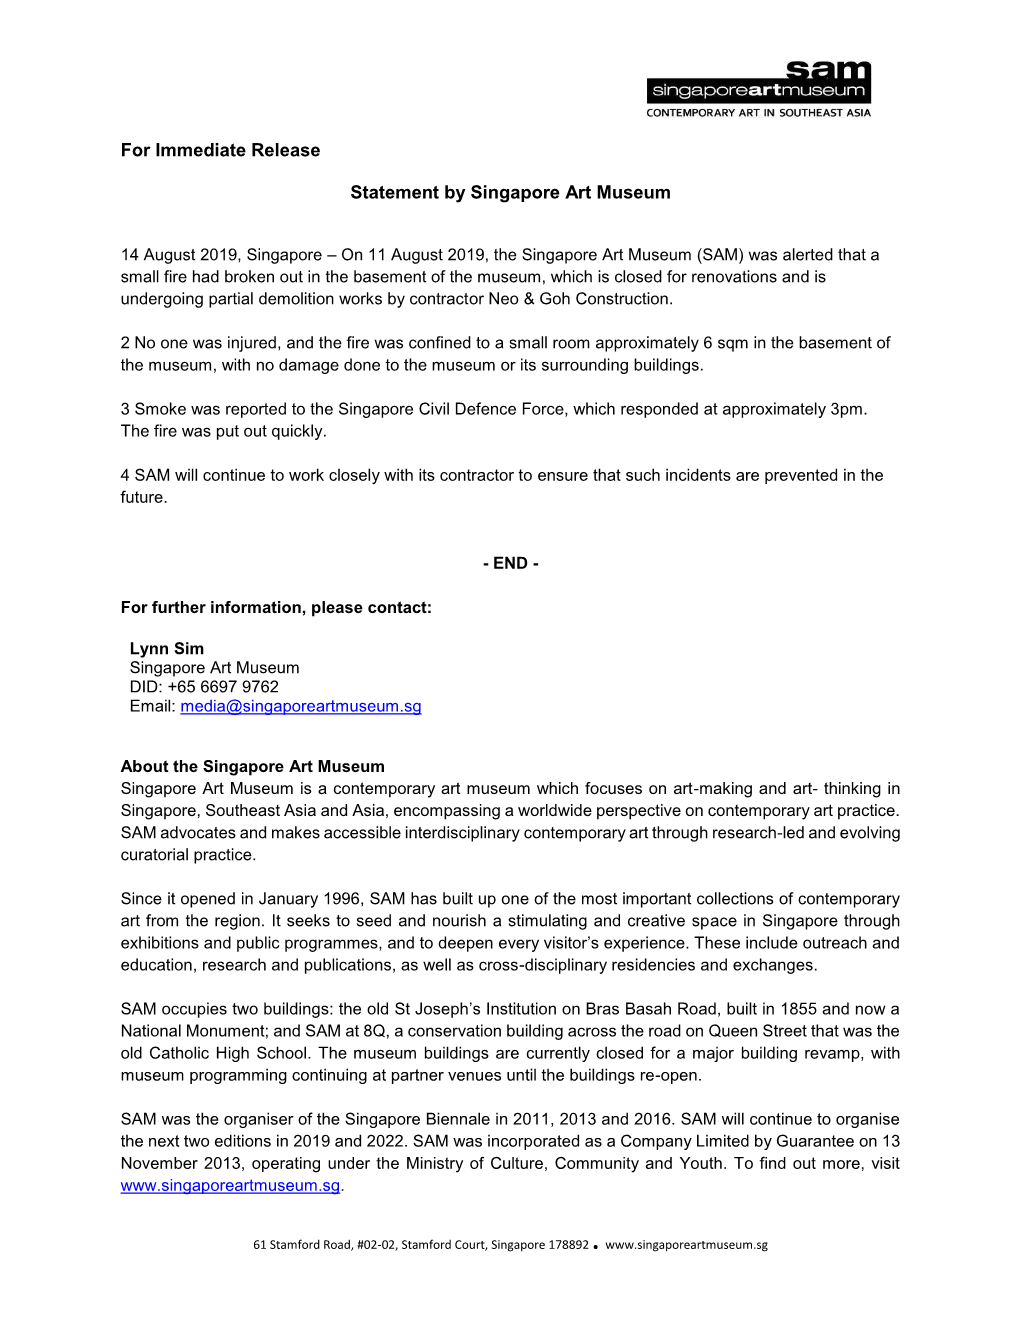 For Immediate Release Statement by Singapore Art Museum